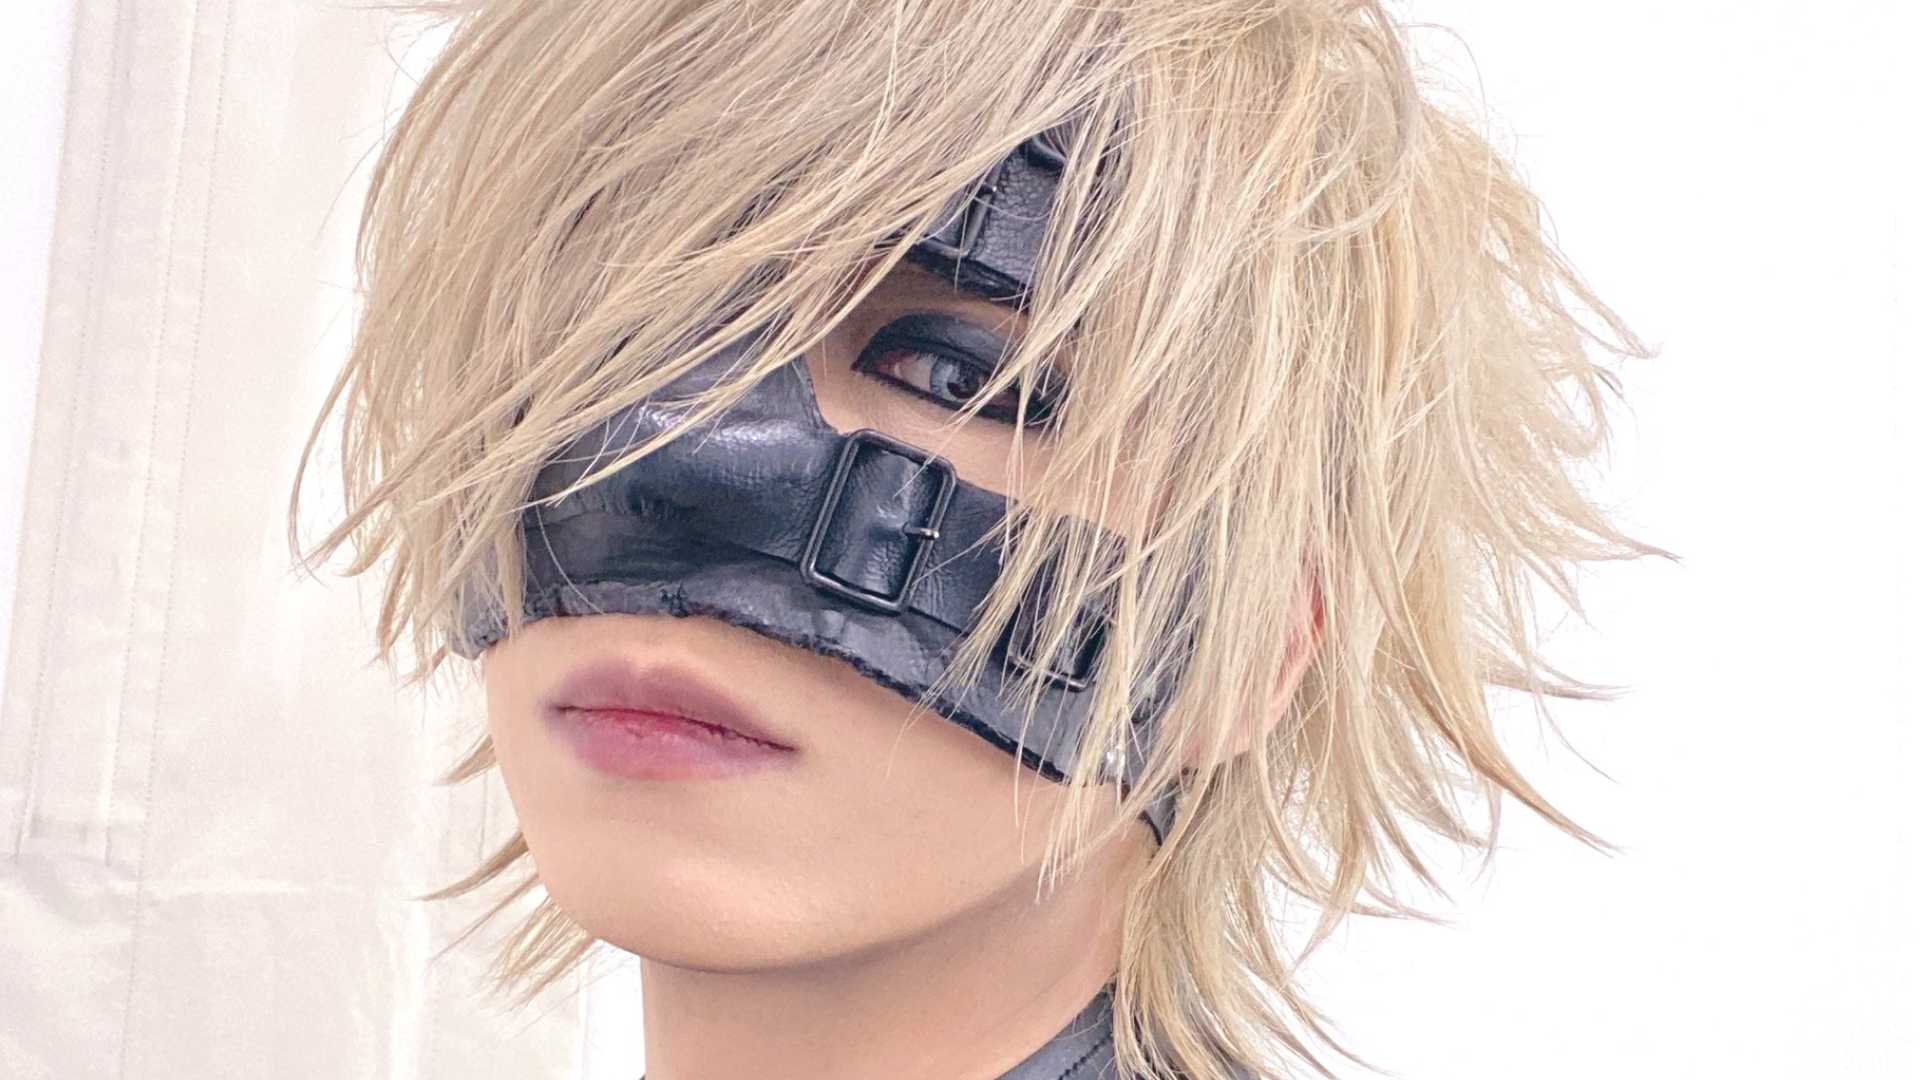 <p>Reita was the bassist of the J-rock band The Gazette. The band is considered one of the biggest J-rock bands not just in Japan, but also worldwide, reports Zoom Japan.</p> <p>Image: gazette05Reita / X</p>